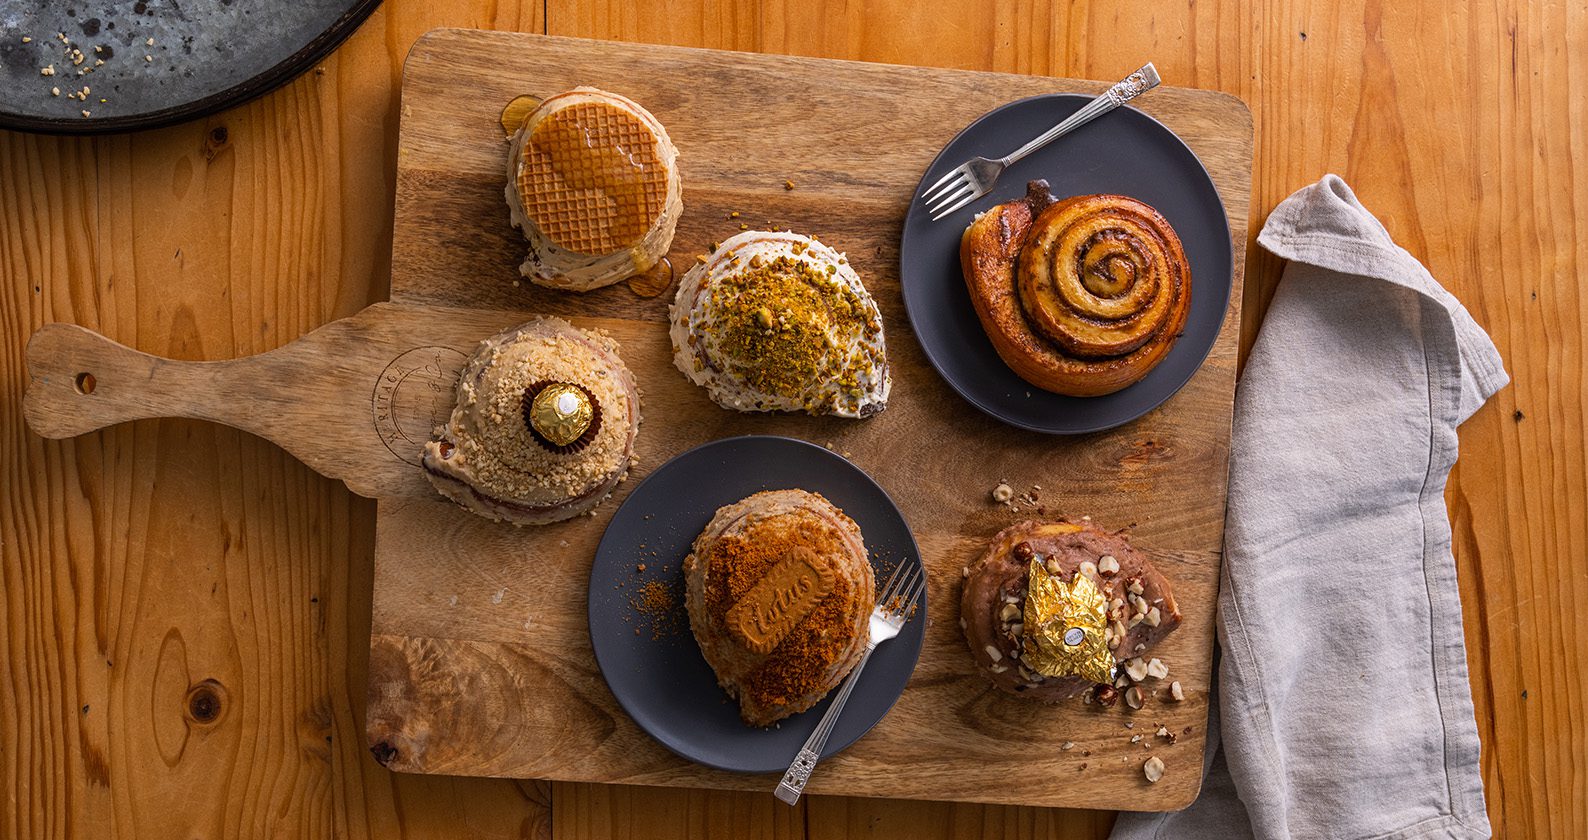 An aerial view of cinnamon scrolls and pastries displayed on a wooden serving board.